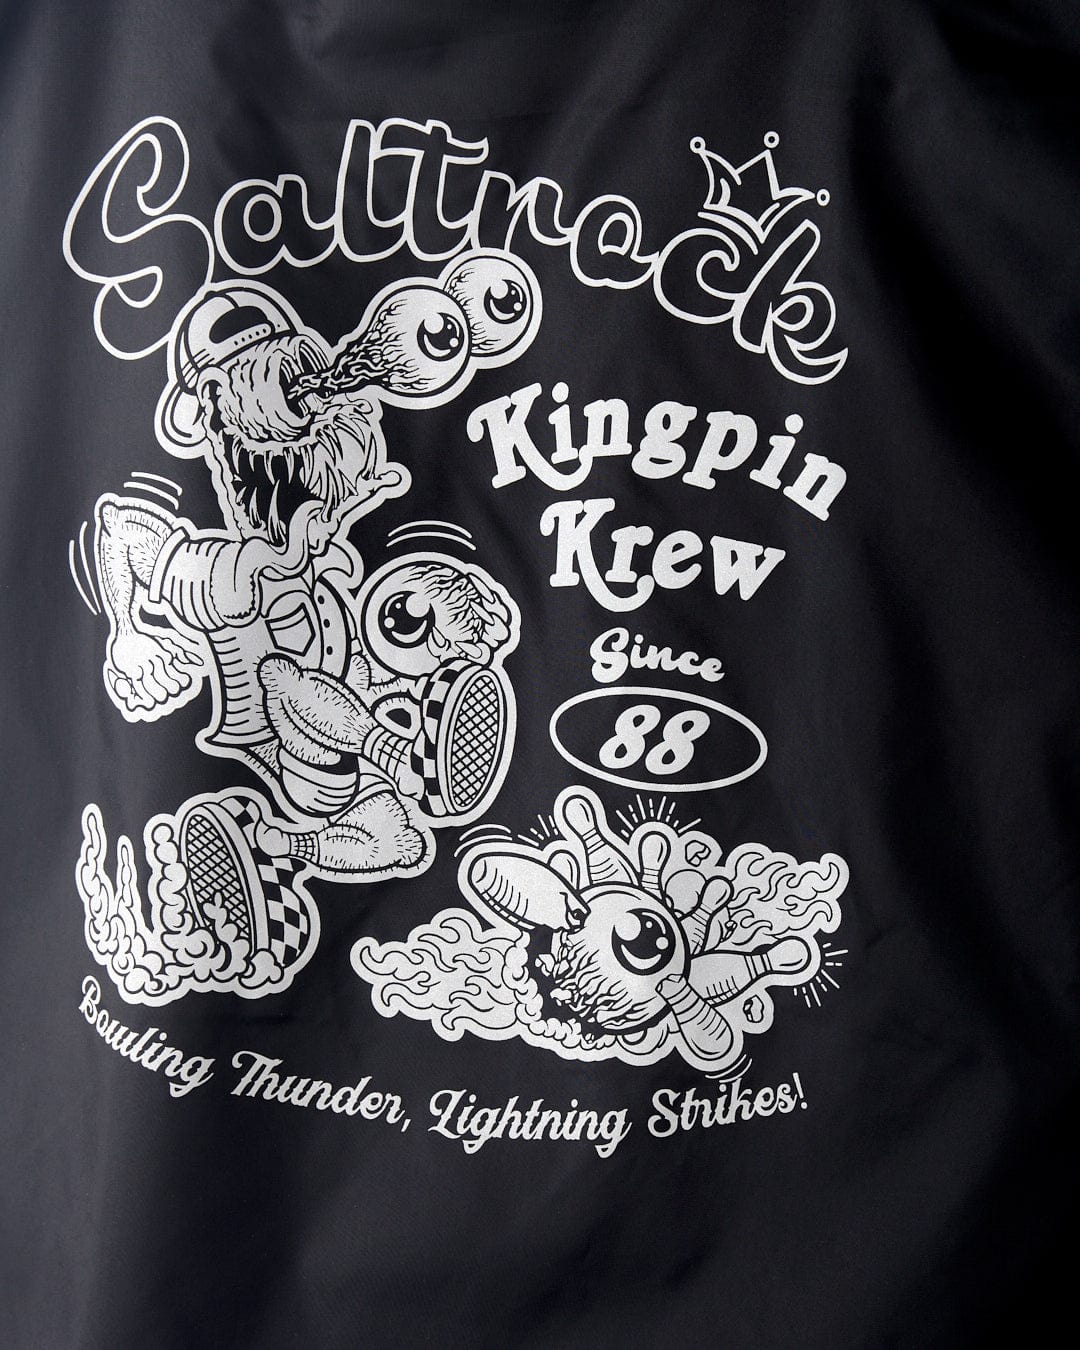 Black t-shirt featuring the "Kingpin Krew - Kids Coach Jacket - Black" white graphic with cartoonish characters bowling and the text "bowling thunder, lightning strikes!", now enhanced with a fleece-lined.